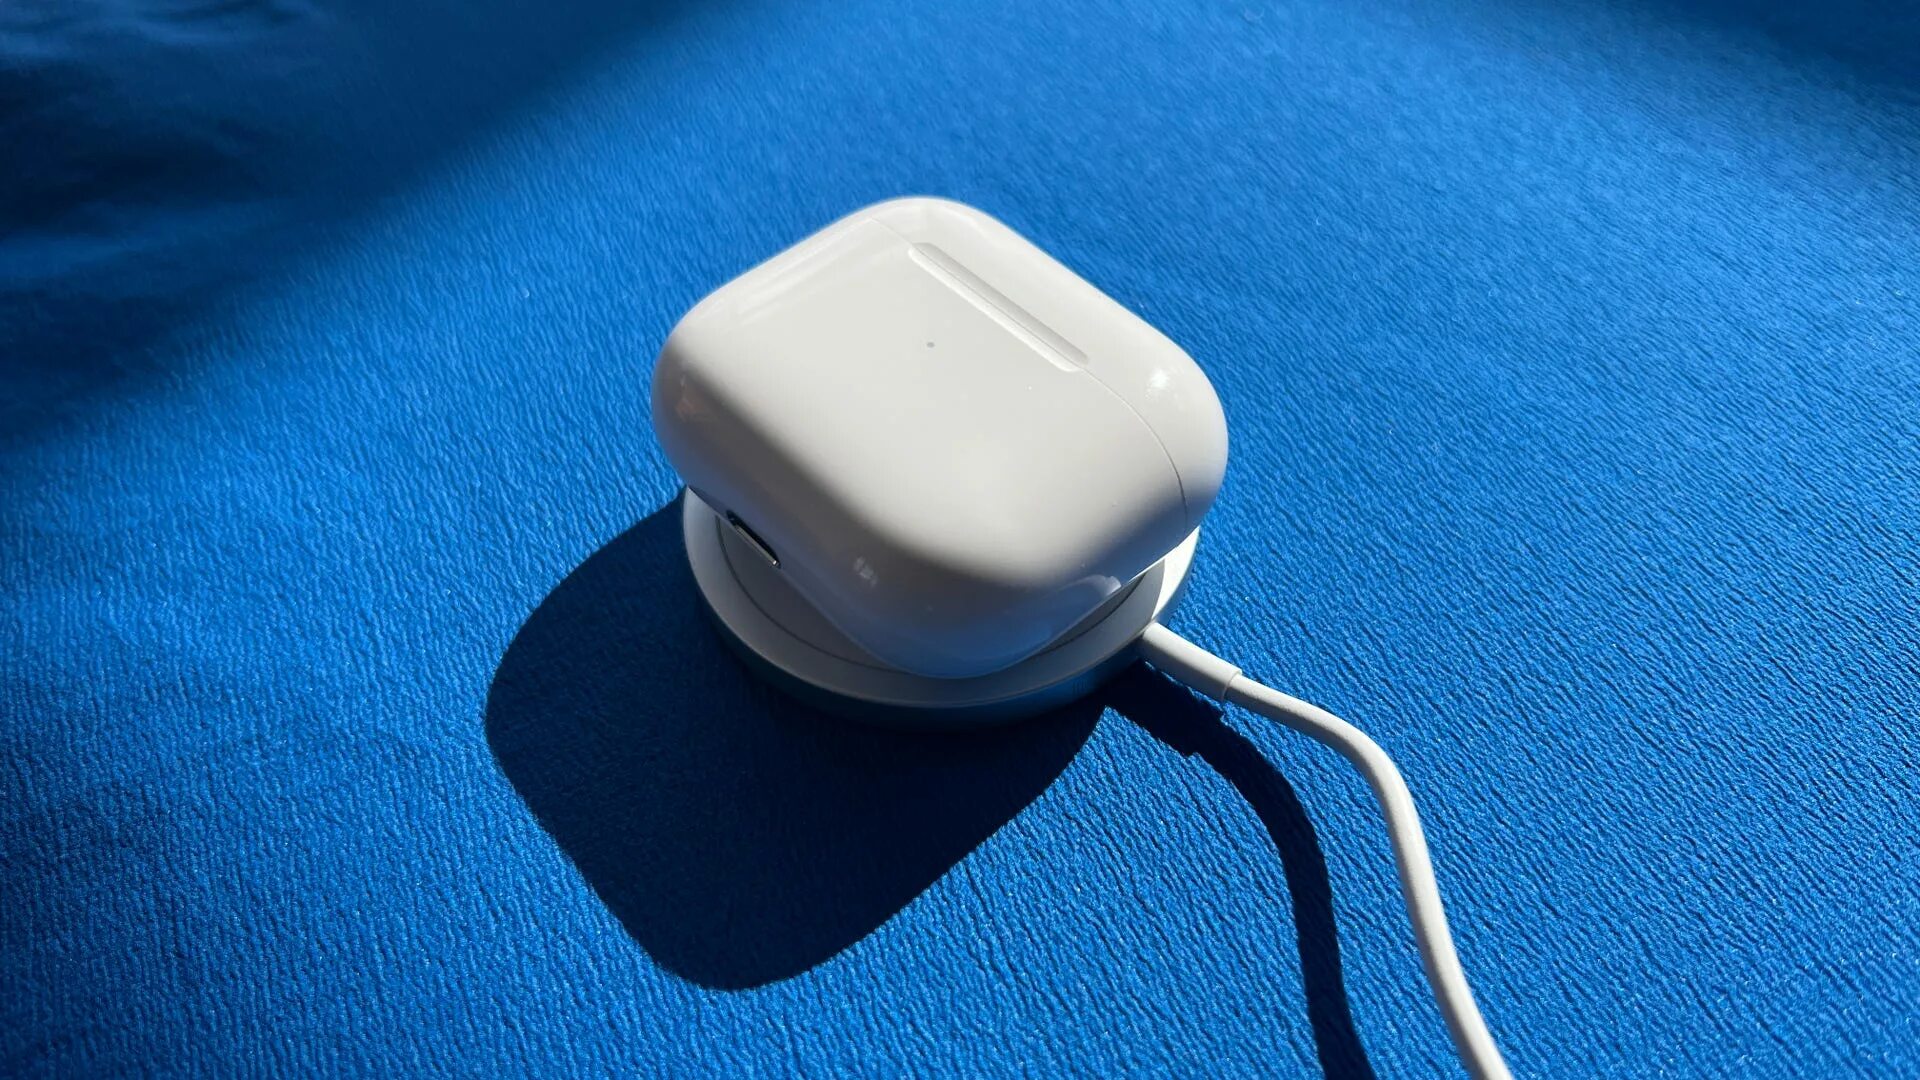 Apple AIRPODS Pro 2 MAGSAFE. Apple AIRPODS Pro MAGSAFE 2021. AIRPODS 3 Pro MAGSAFE. Air pods 3 MAGSAFE. Индикаторы зарядки airpods